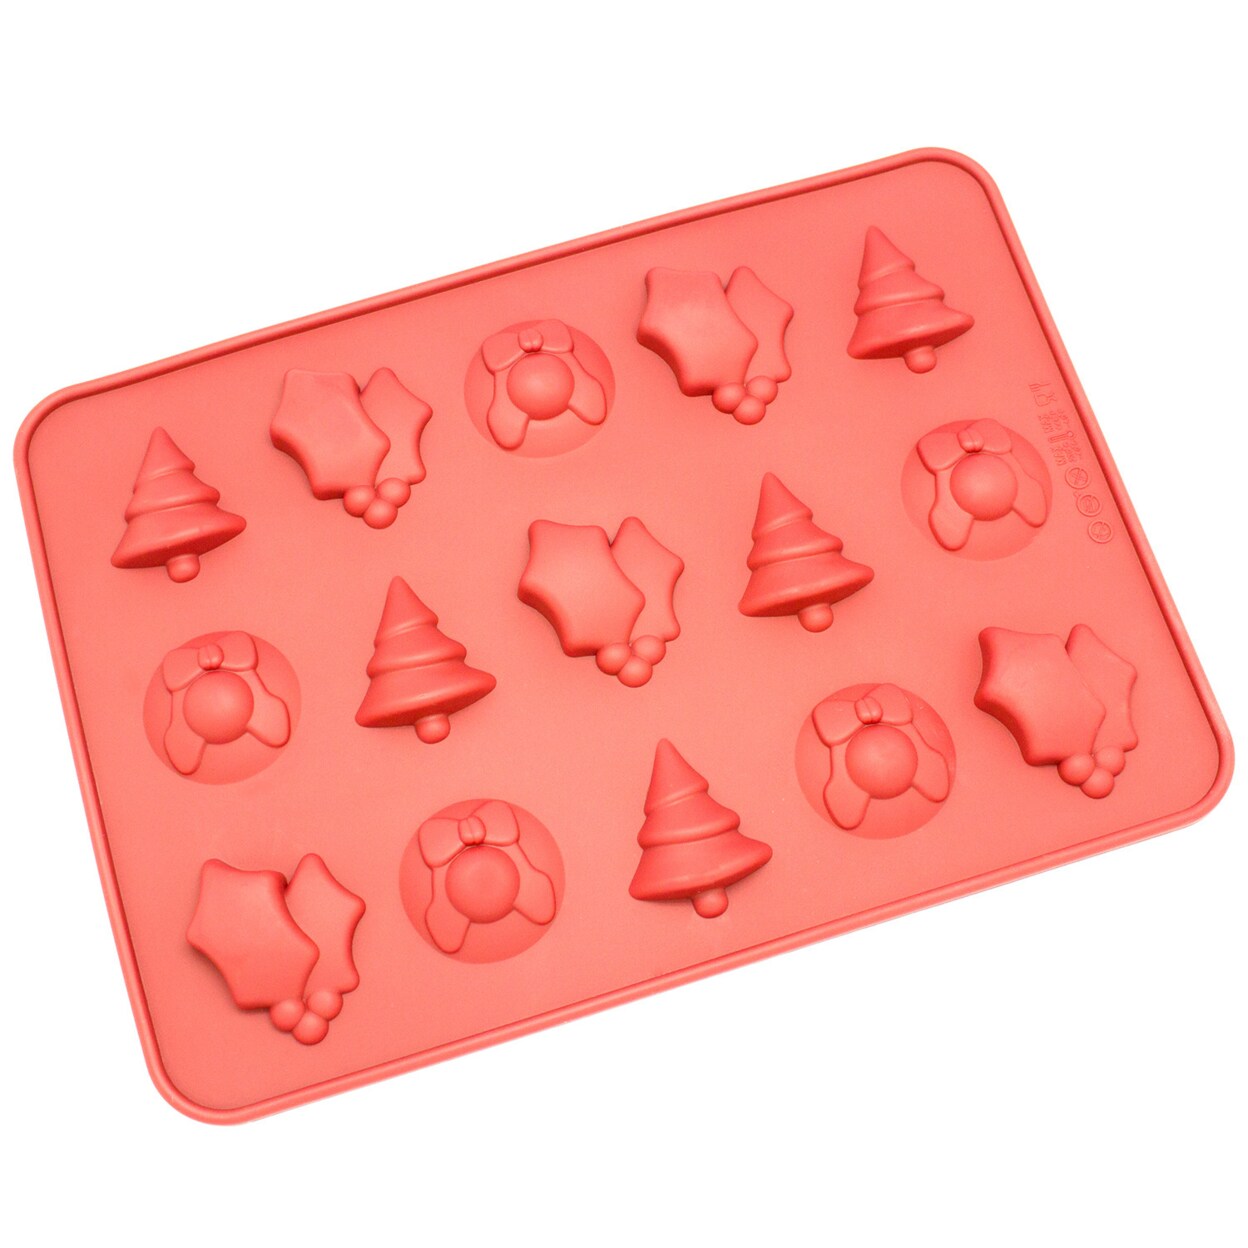 Freshware Silicone Mold, Chocolate Mold, Candy Mold, Ice Mold, Soap Mold  for Chocolate, Candy and Gummy, Toy, 15-Cavity